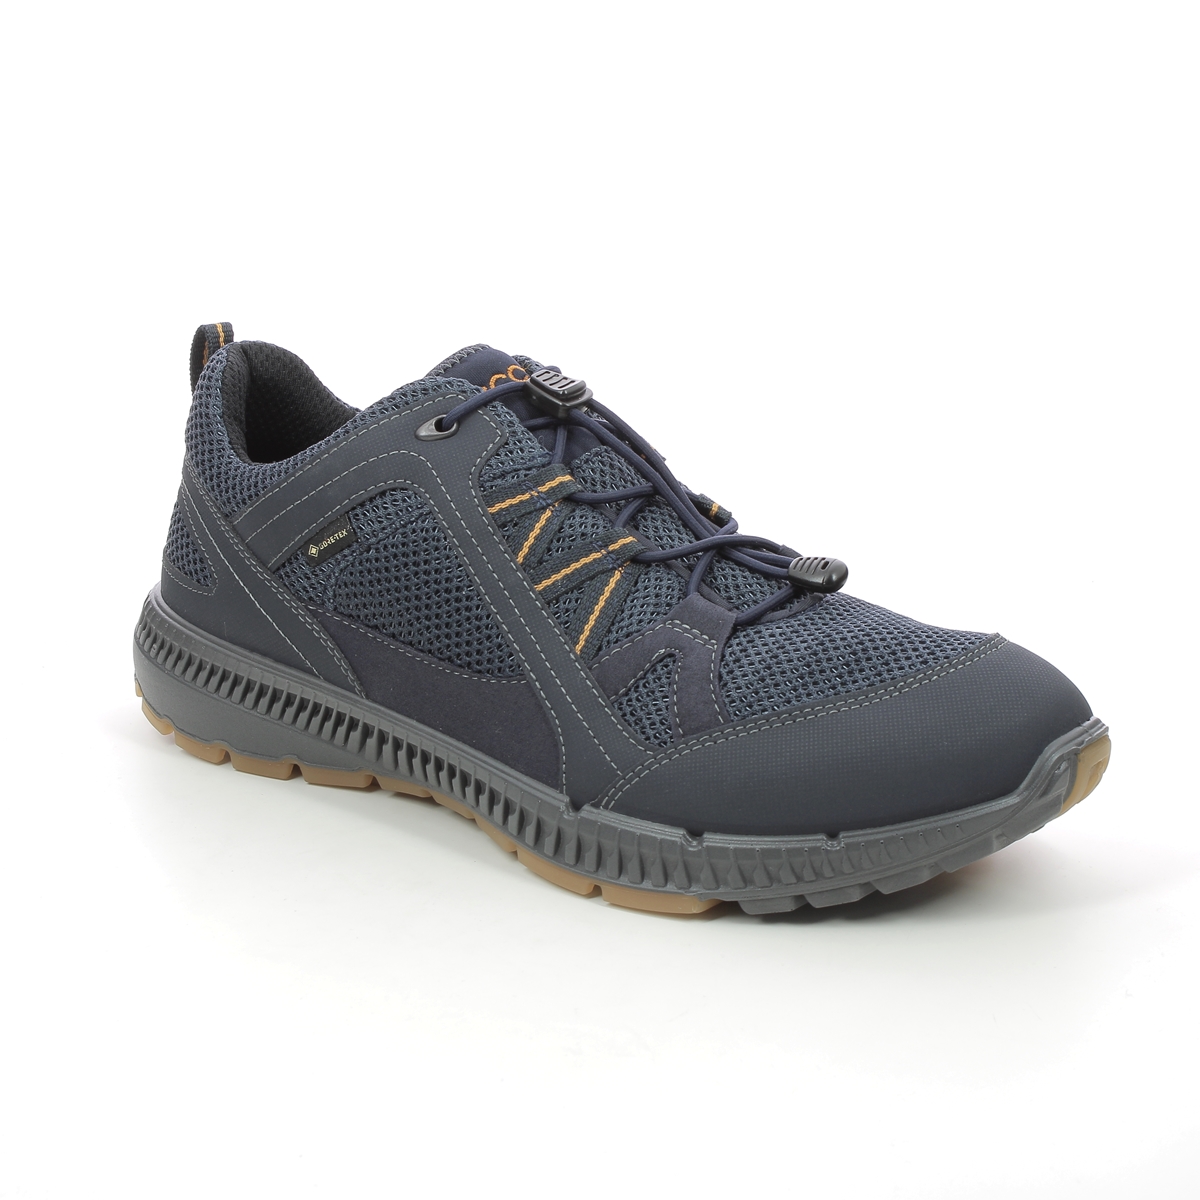 ECCO Terracruise Gtx Navy Mens trainers 843064-51241 in a Plain Man-made in Size 45